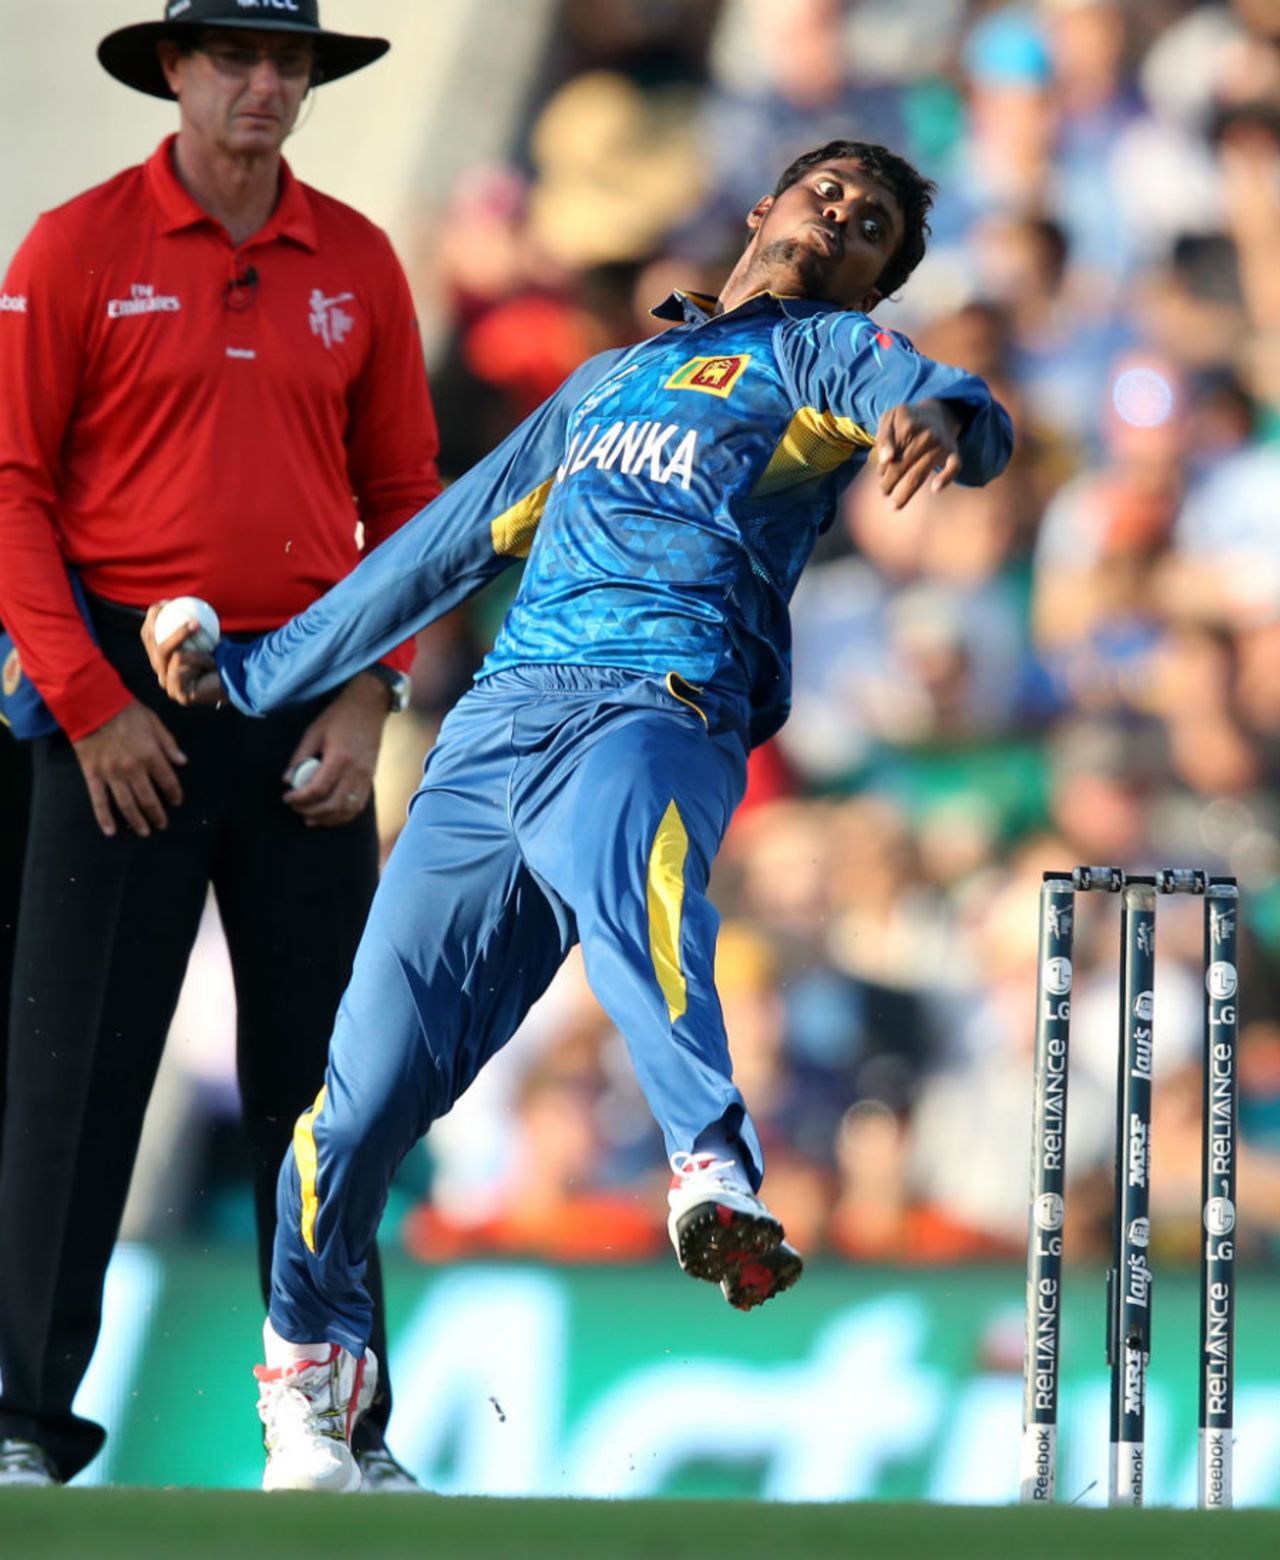 Duplicate Murali: Tharindu Kaushal's in his delivery stride, South Africa v Sri Lanka, World Cup 2015, 1st quarter-final, Sydney, March 18, 2015